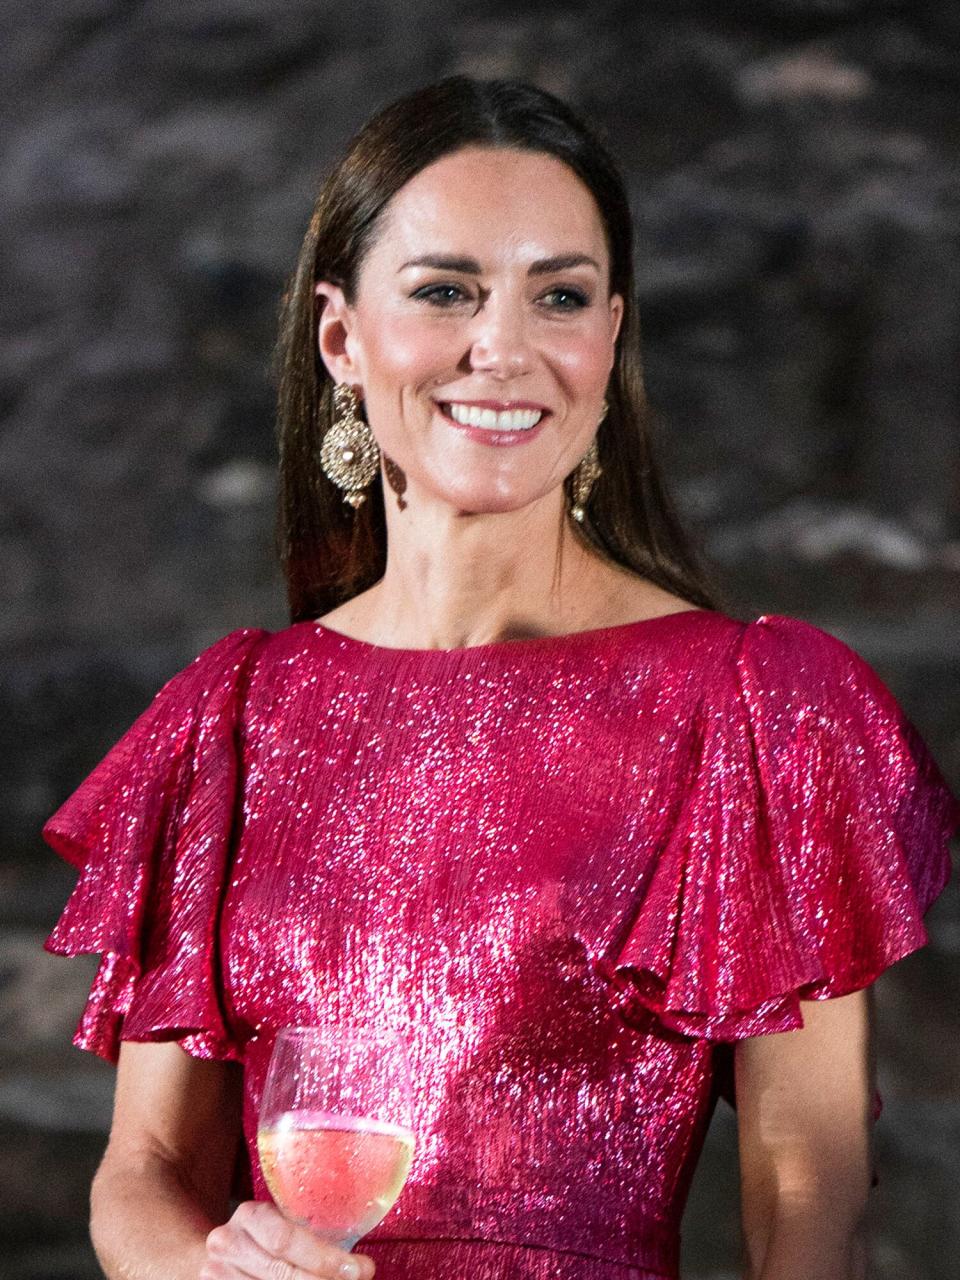 Catherine, Duchess of Cambridge attends a special reception hosted by the Governor General of Belize in celebration of Her Majesty The Queen’s Platinum Jubilee on March 21, 2022 in Cahal Pech, Belize